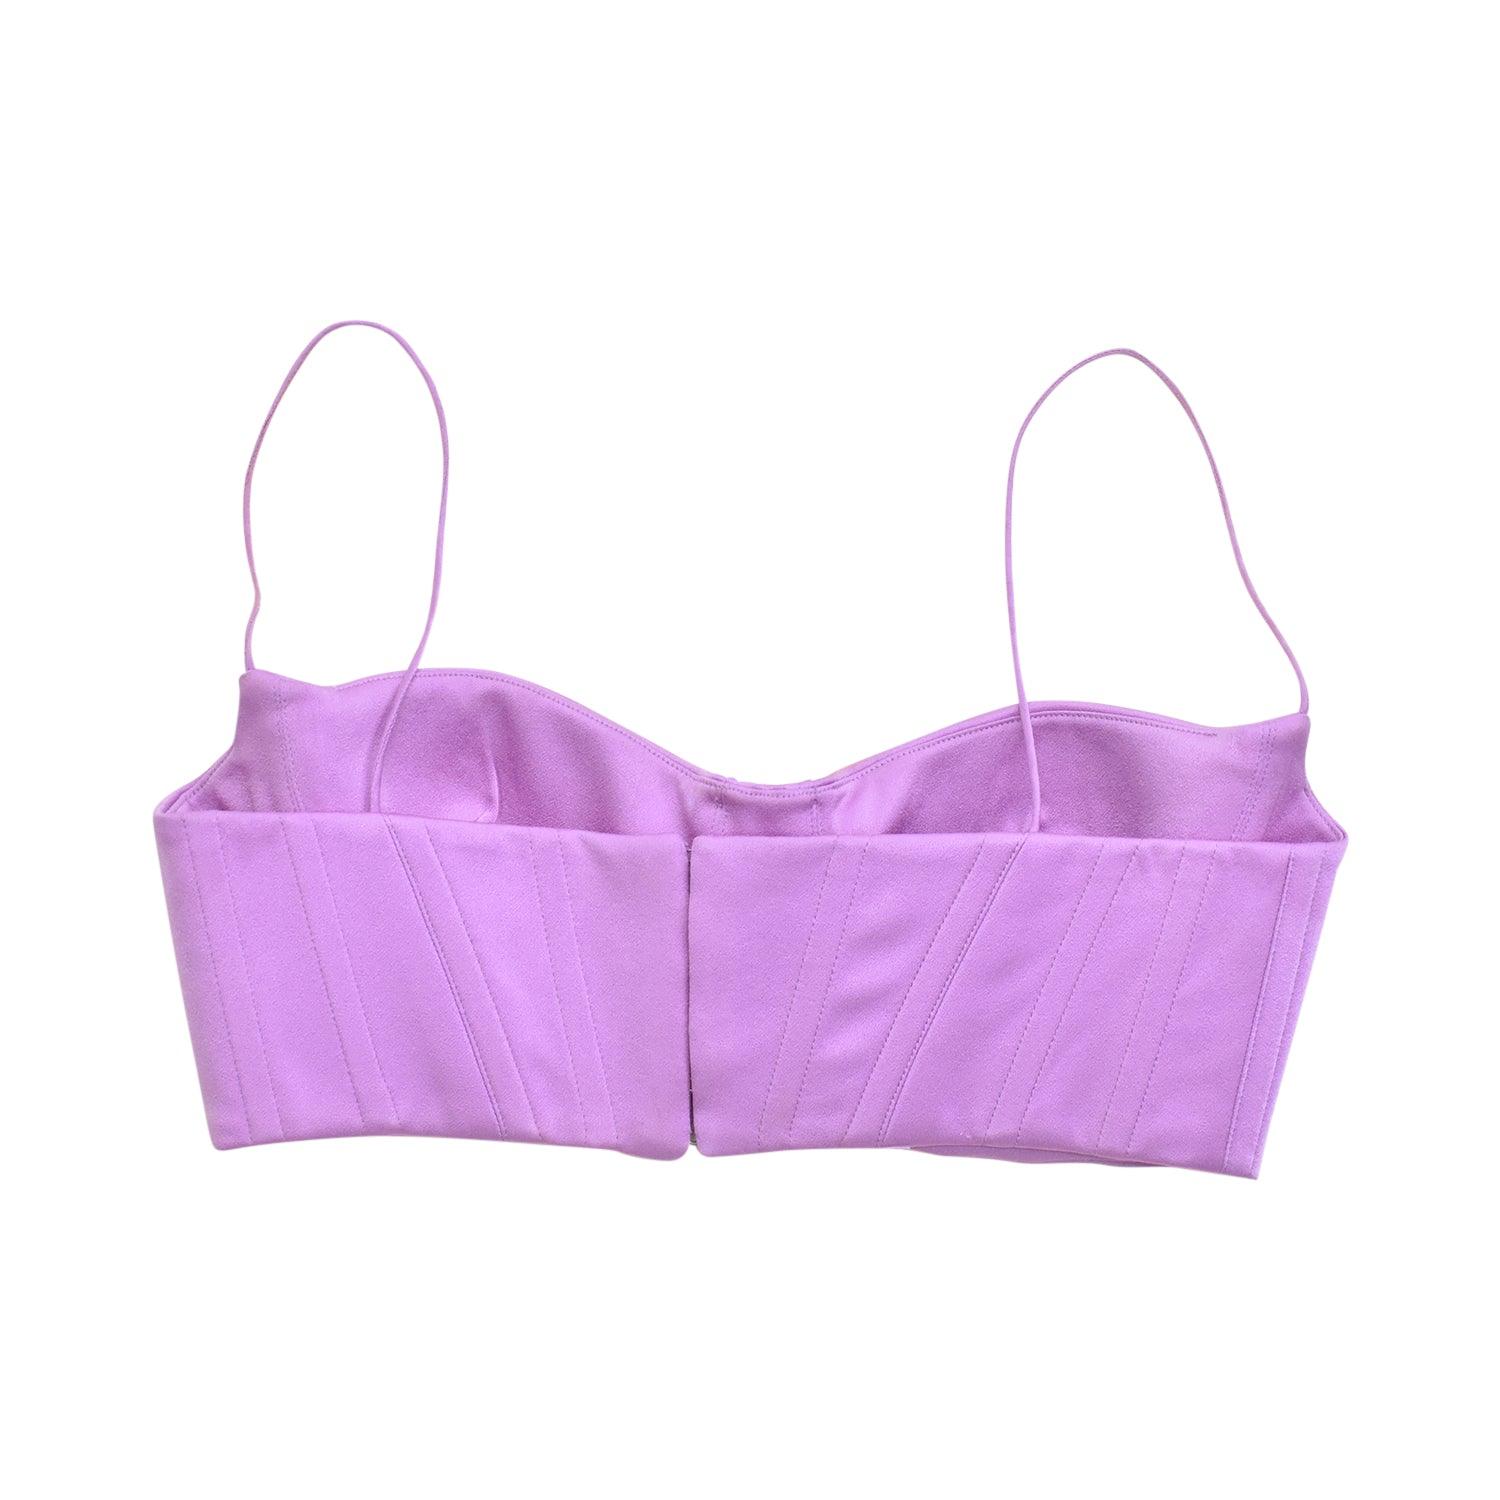 Alex Perry Bra Top - Women's 6 - Fashionably Yours